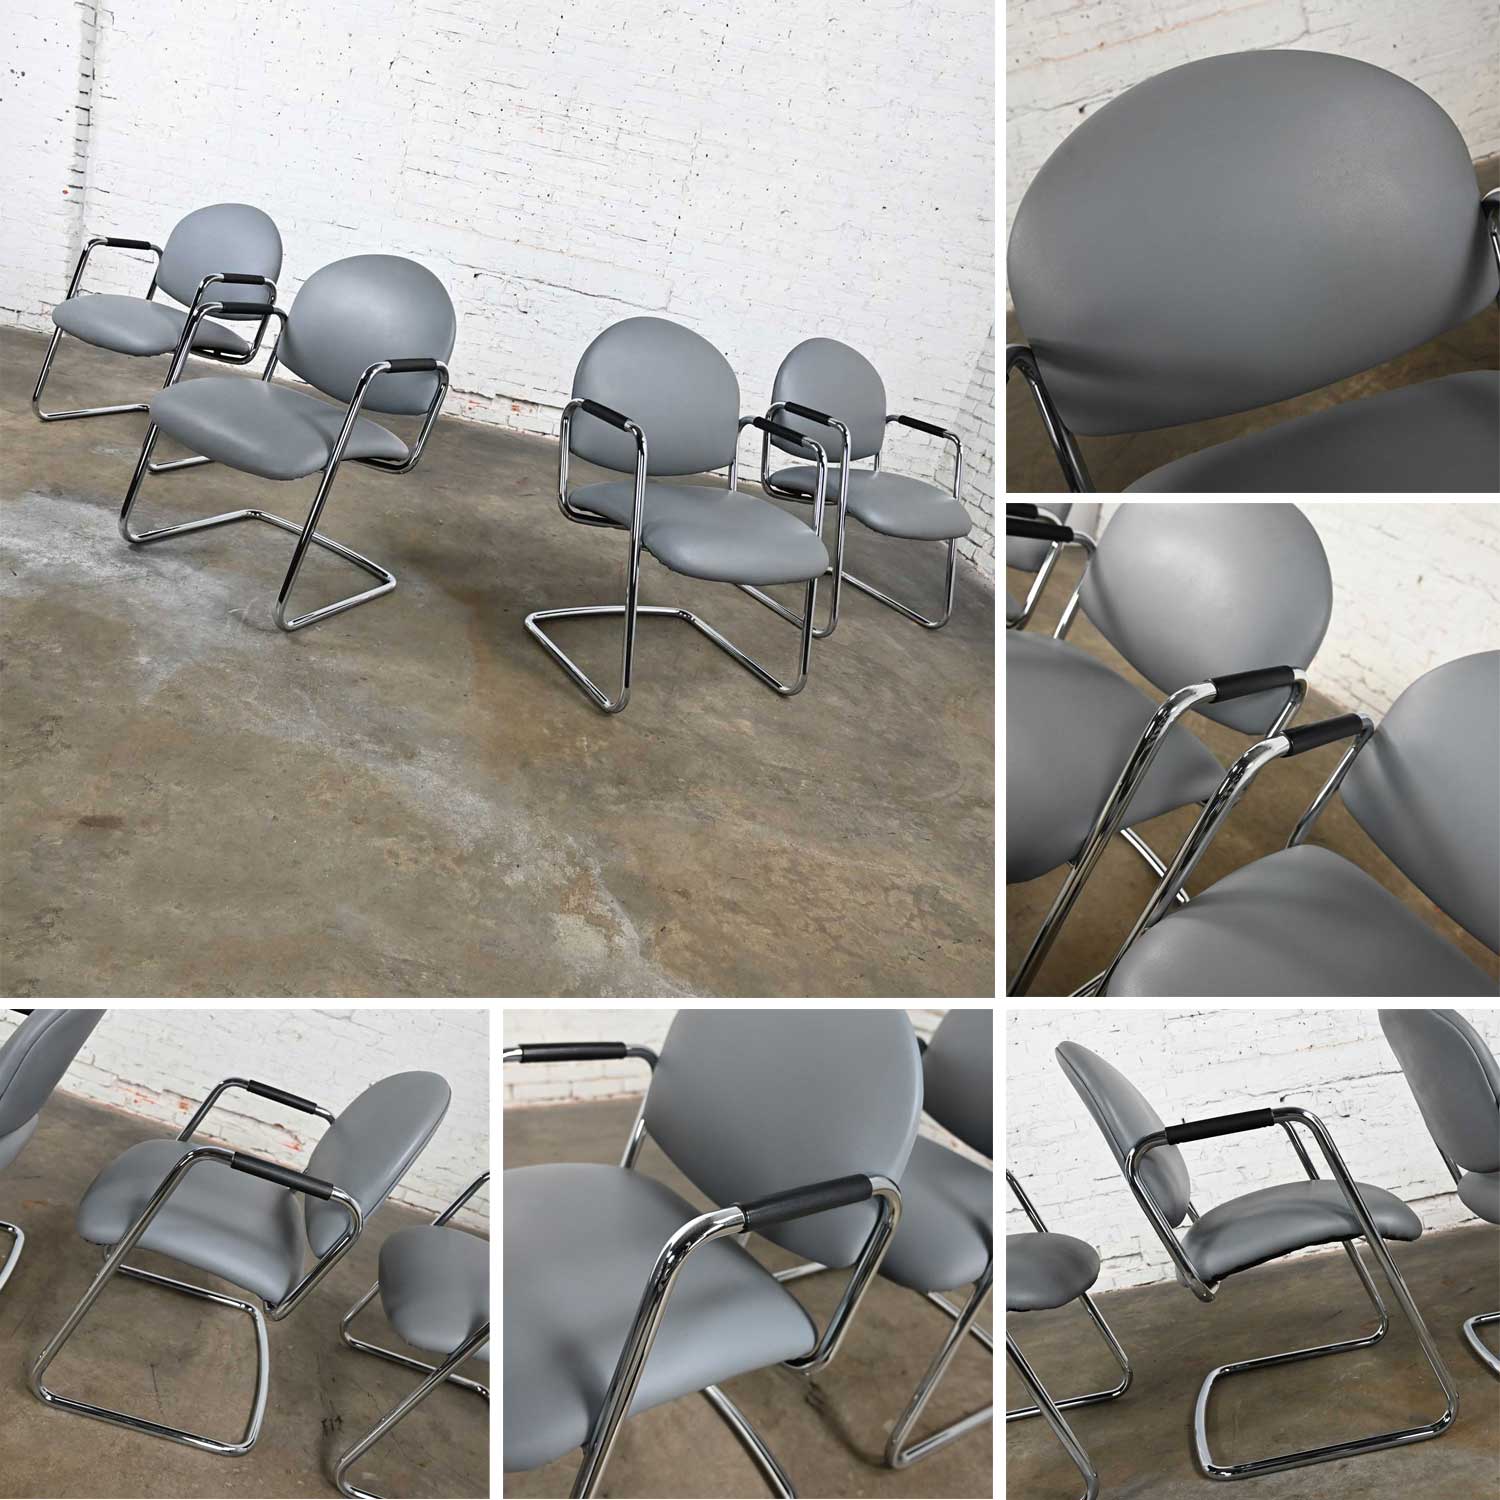 Vintage Modern Steelcase Chrome Tube Cantilever Base & Gray Faux Leather Chairs set of 4